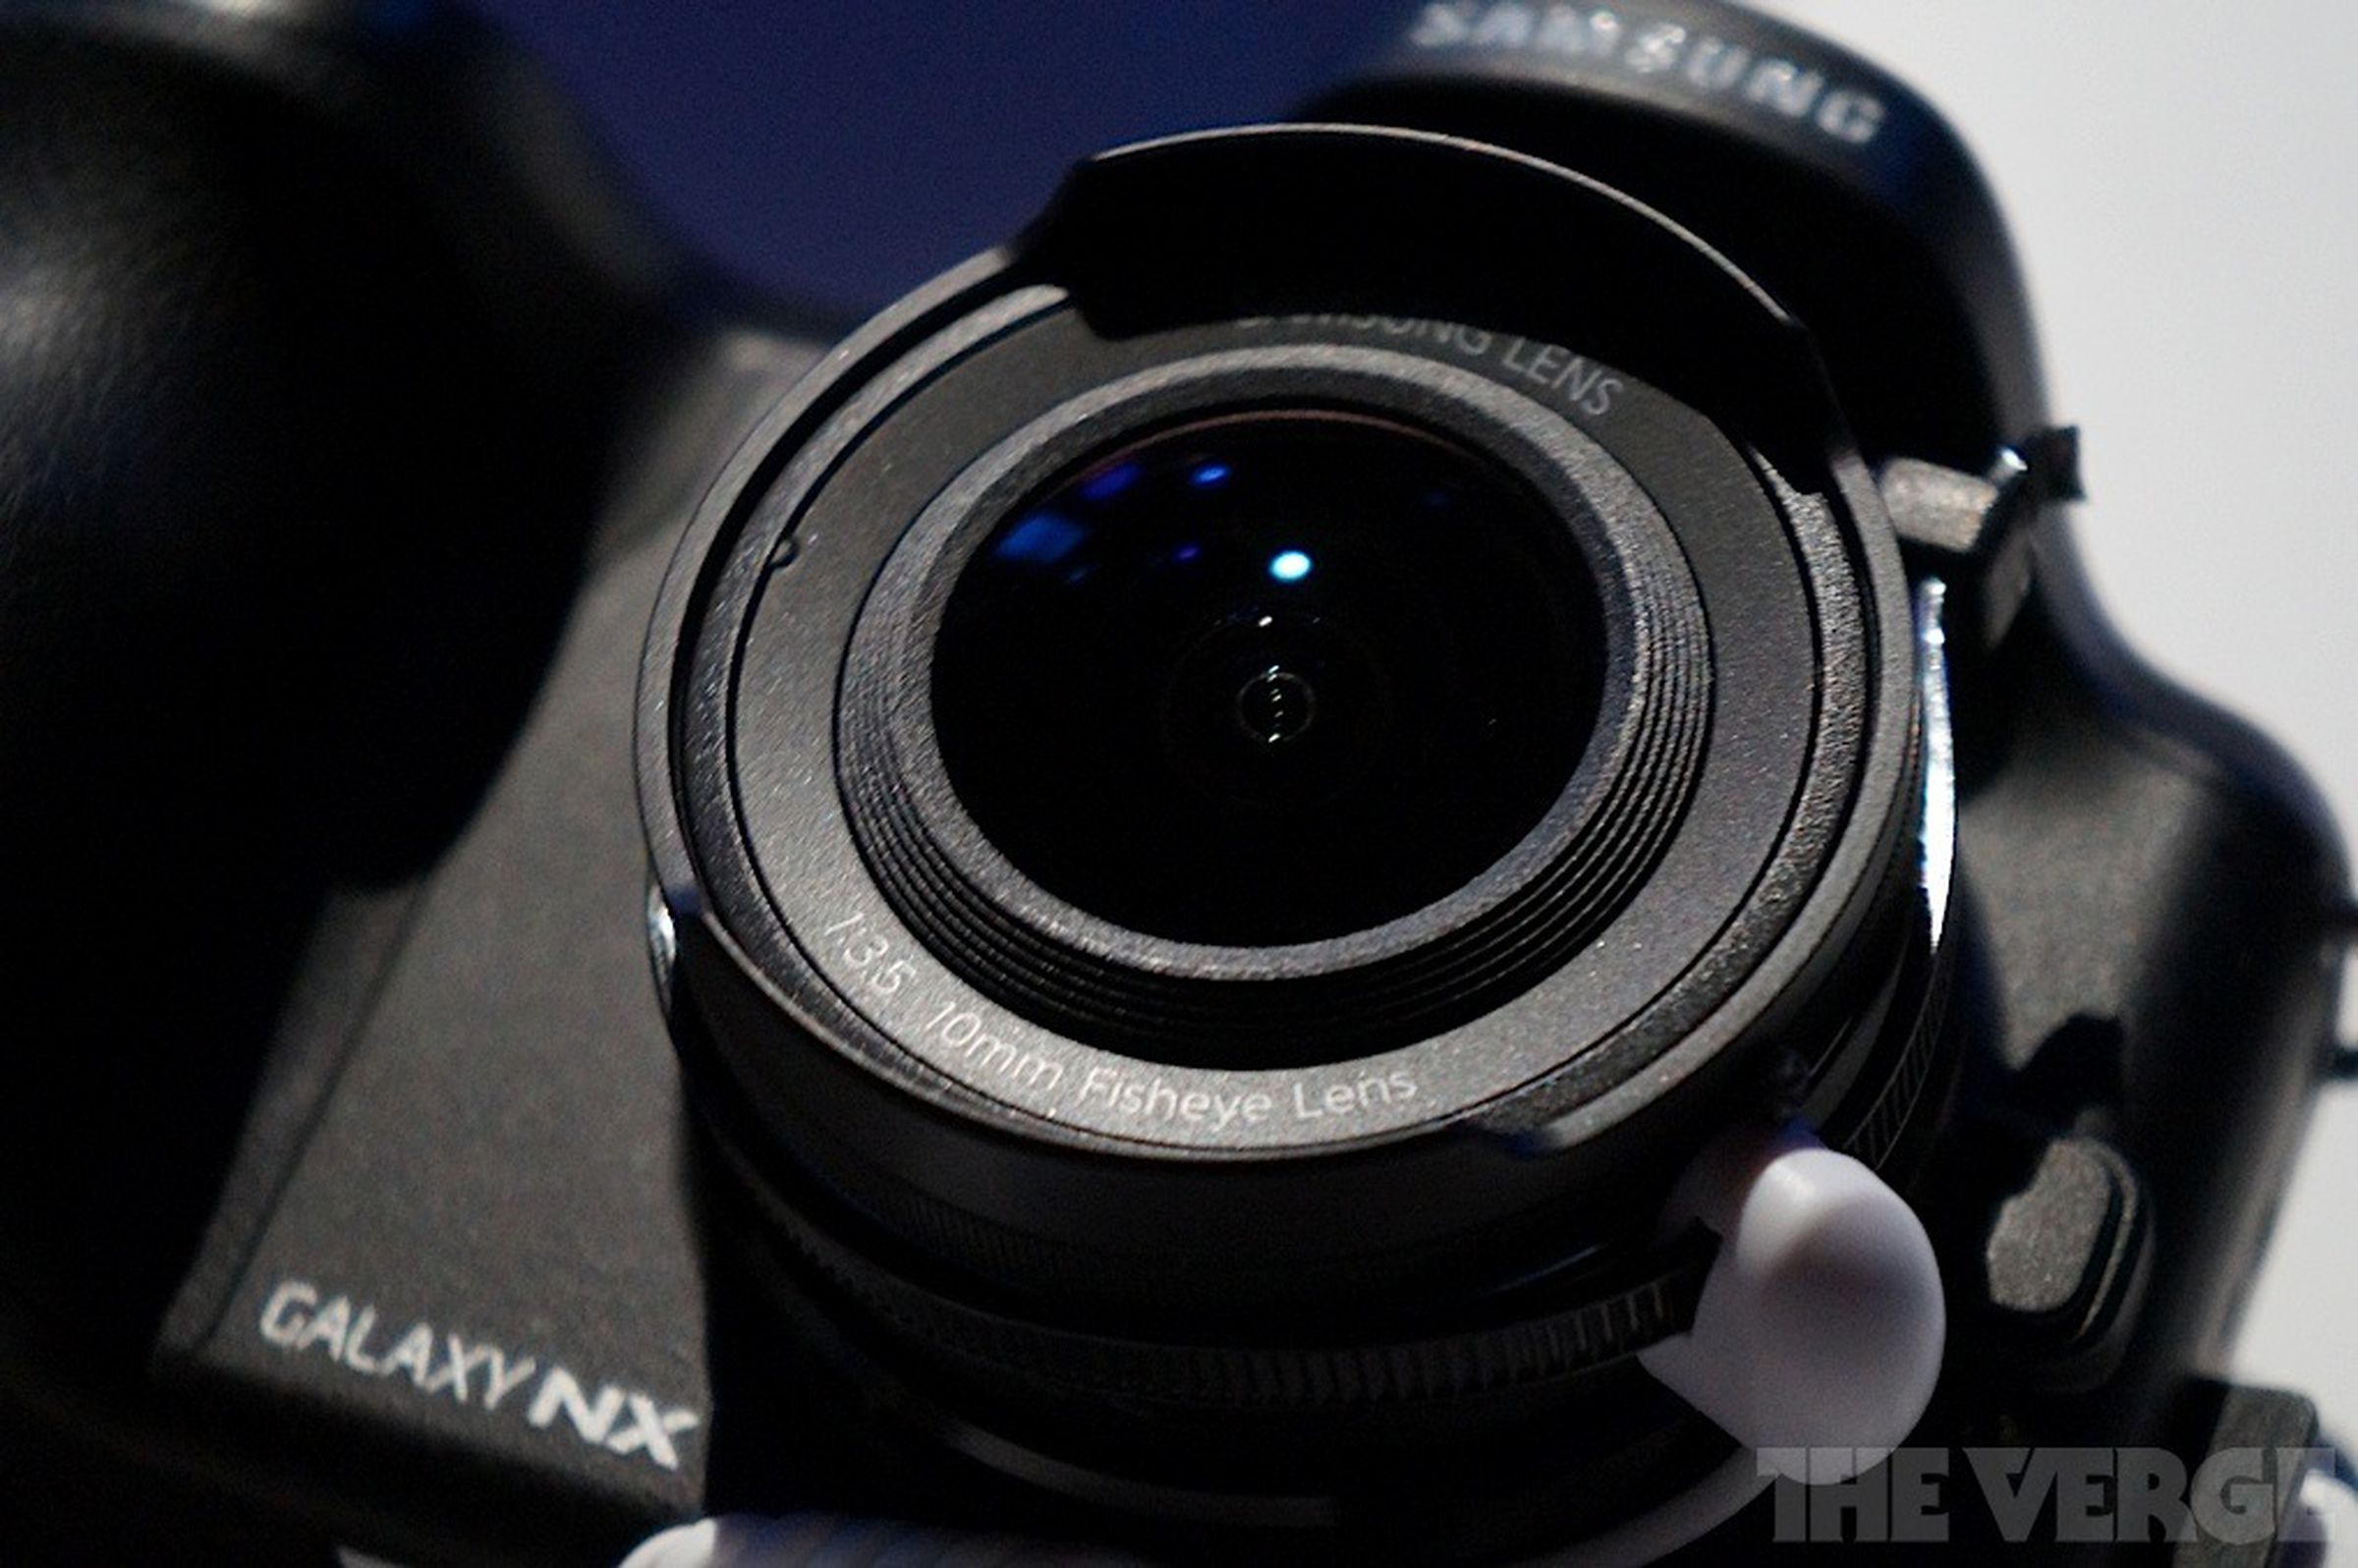 Samsung Galaxy NX hands-on pictures